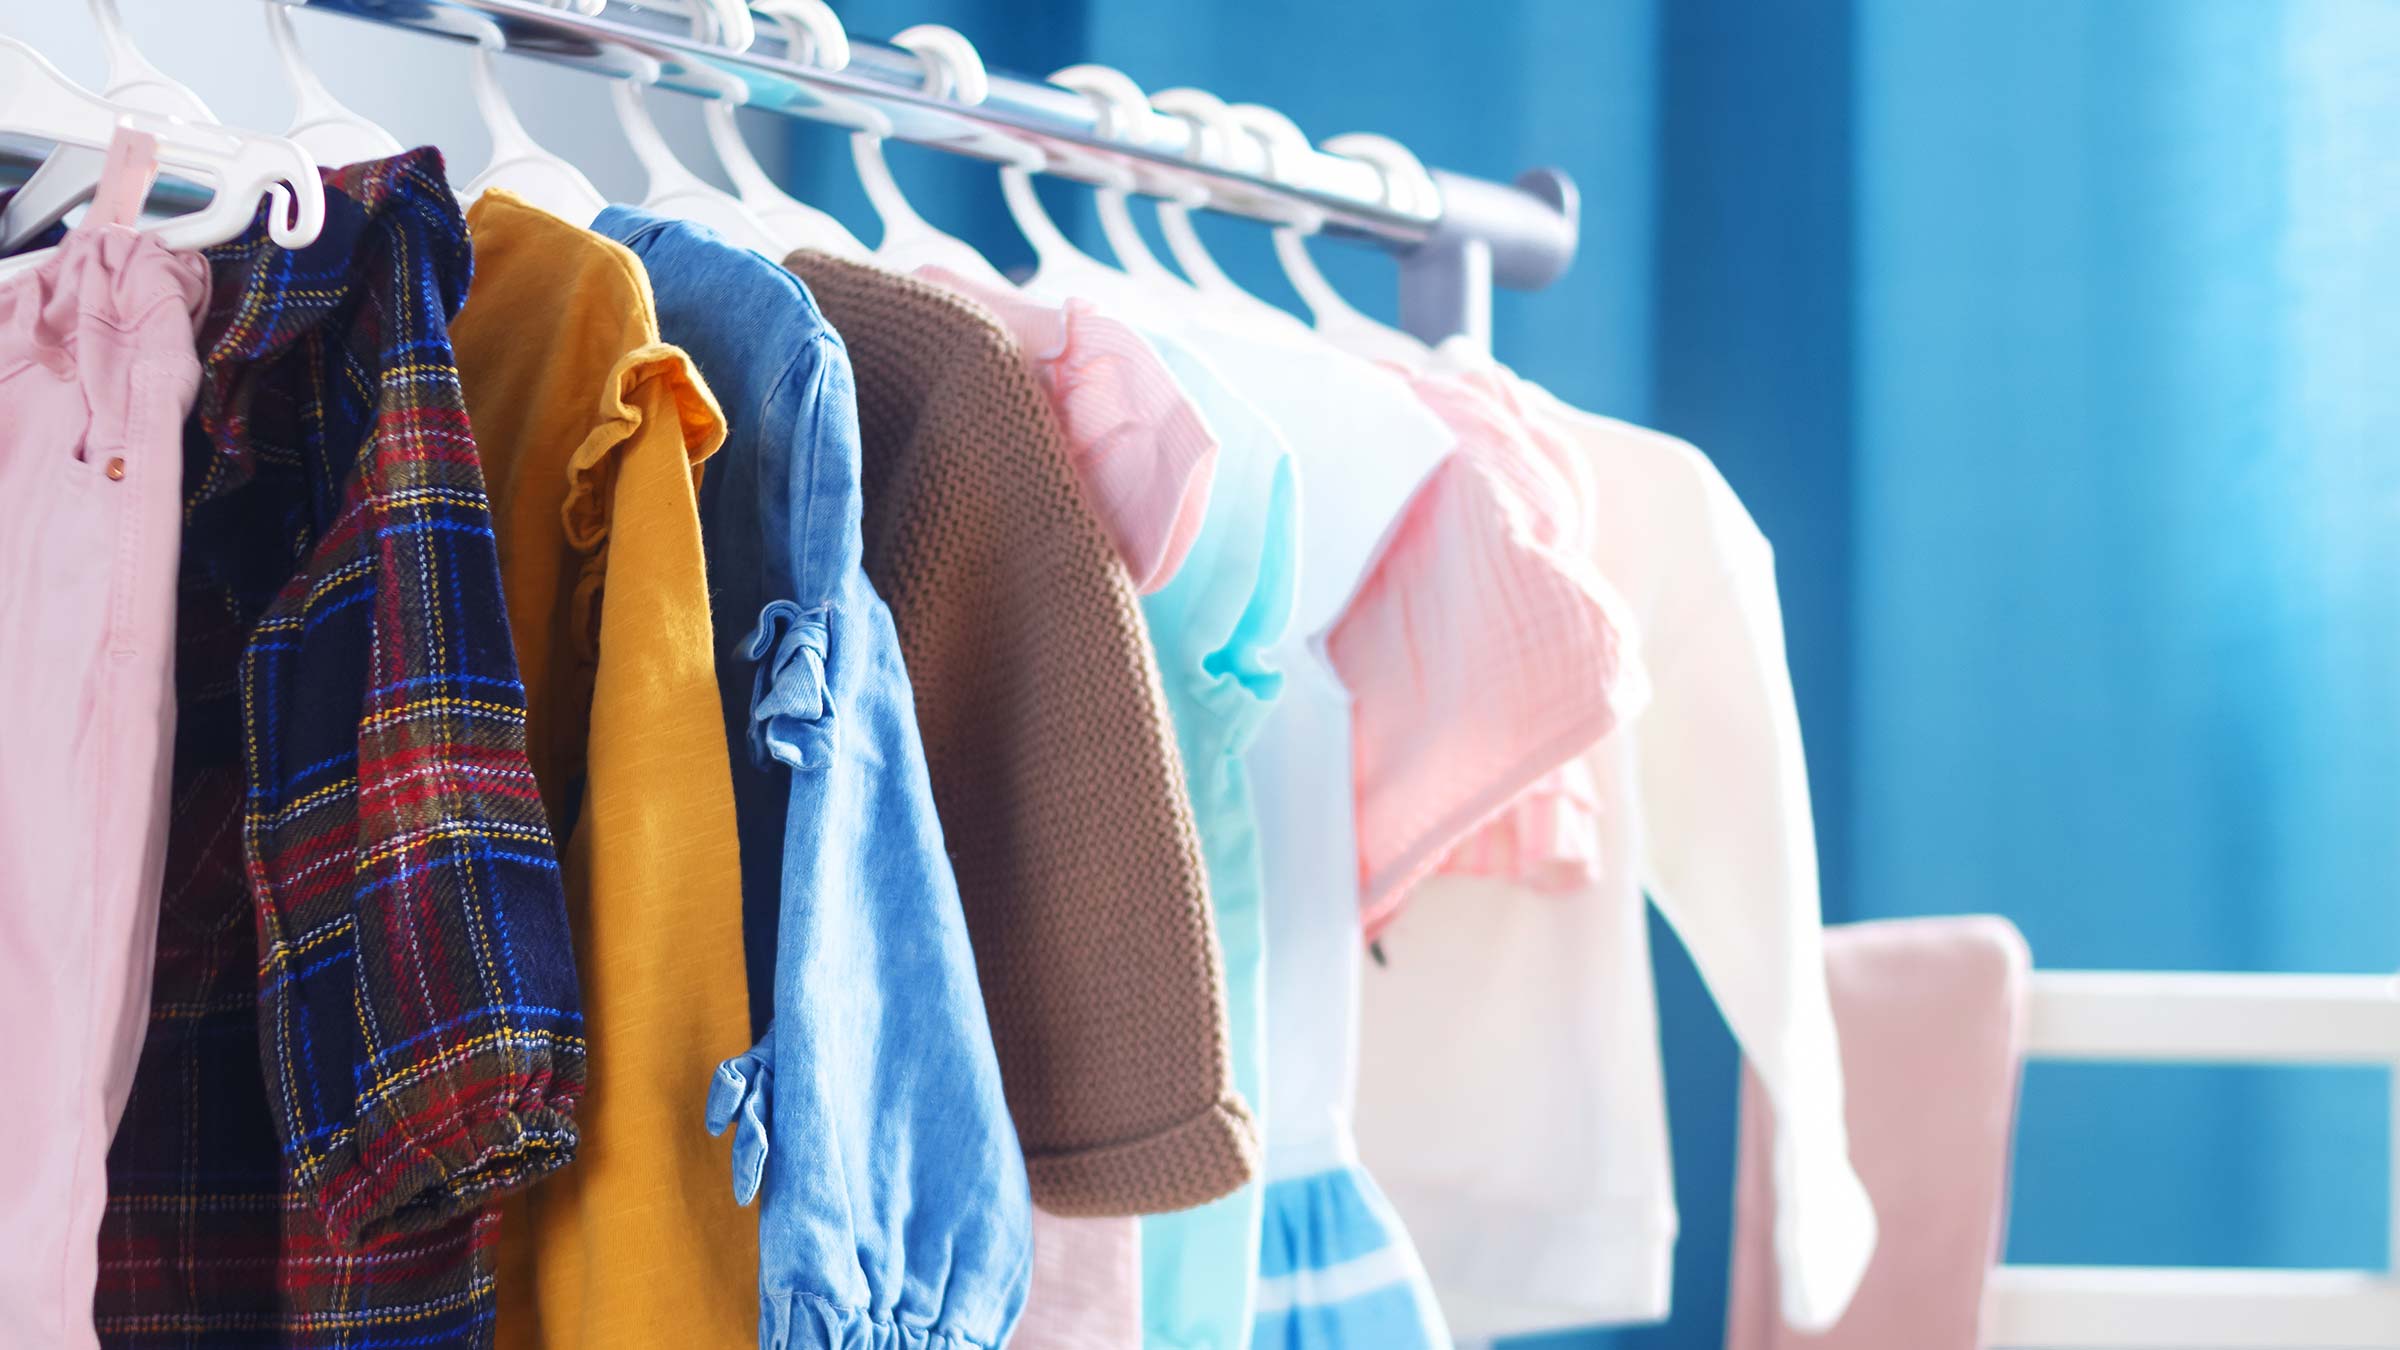 What sustainable fashion can learn from childrenswear